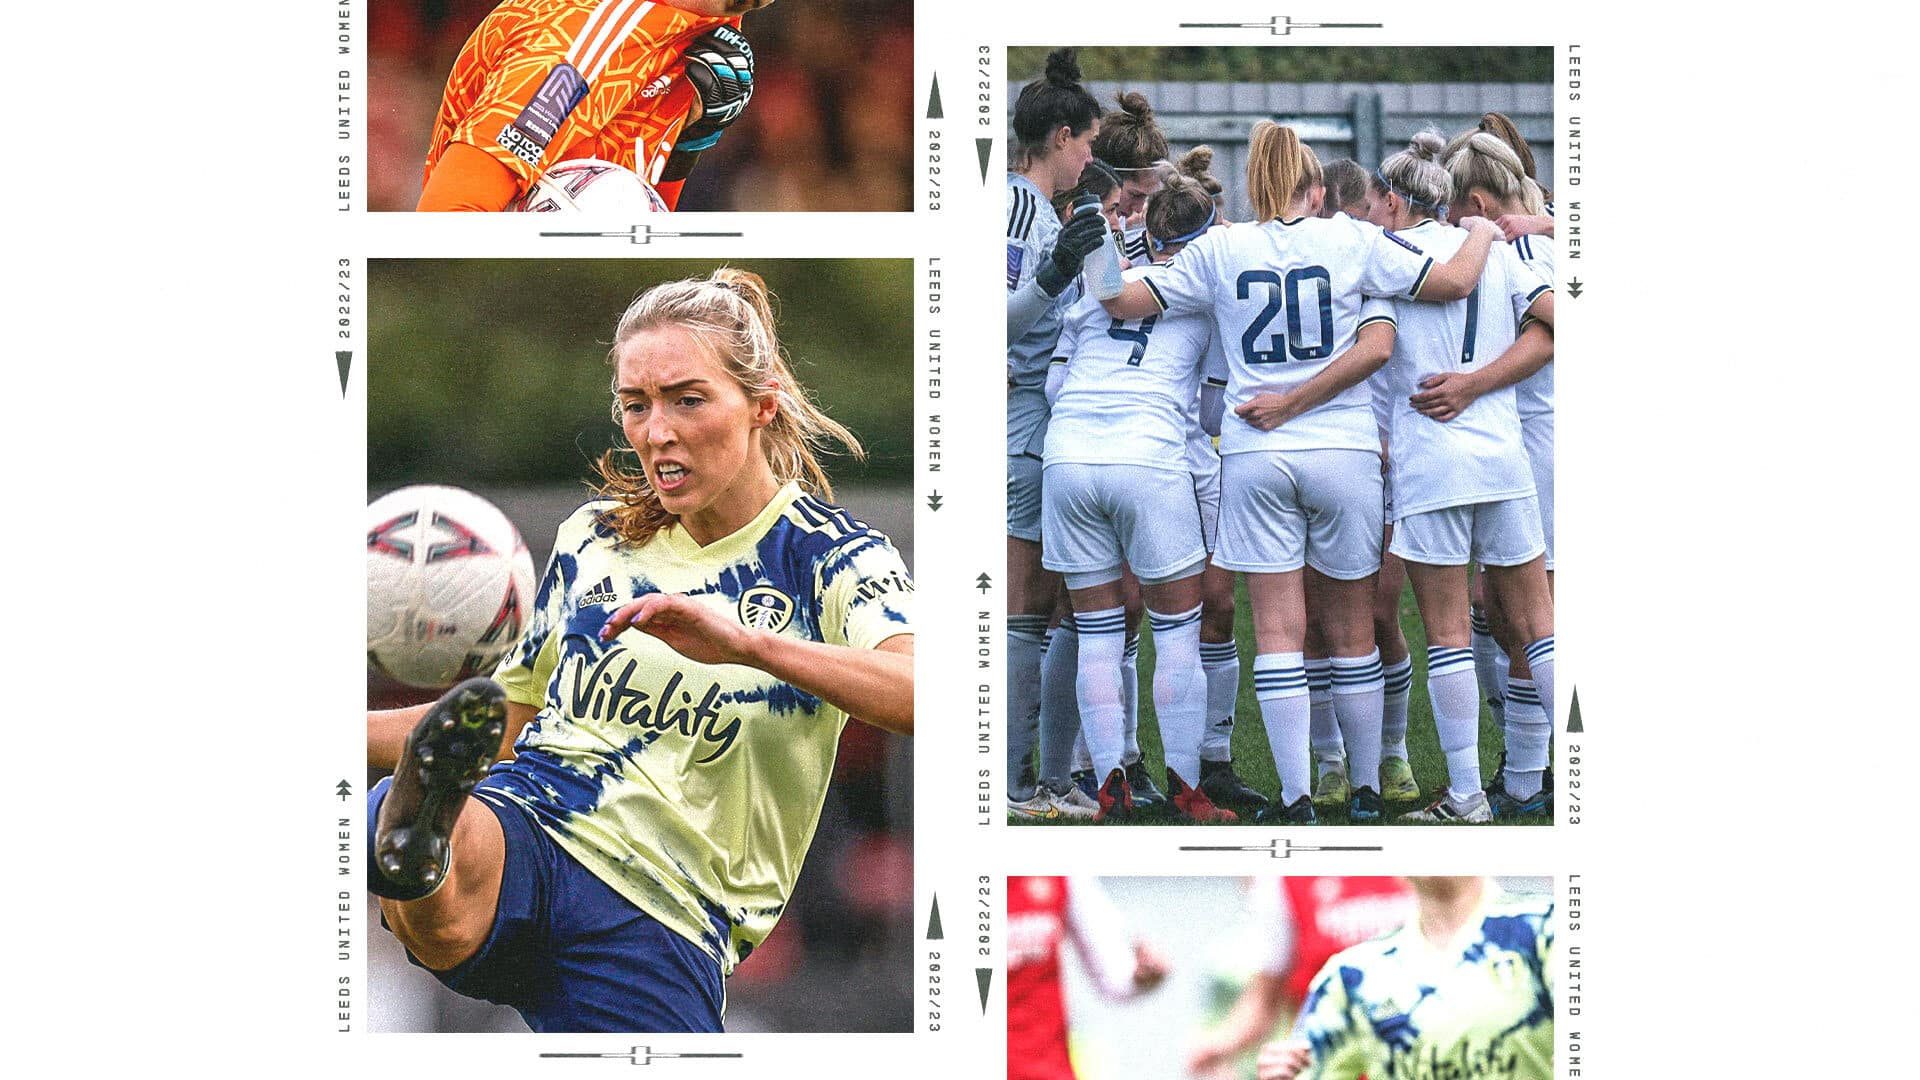 A graphic showing various photos of Leeds United Women players, including Cath Hamill, Carrie Simpson and a team huddle